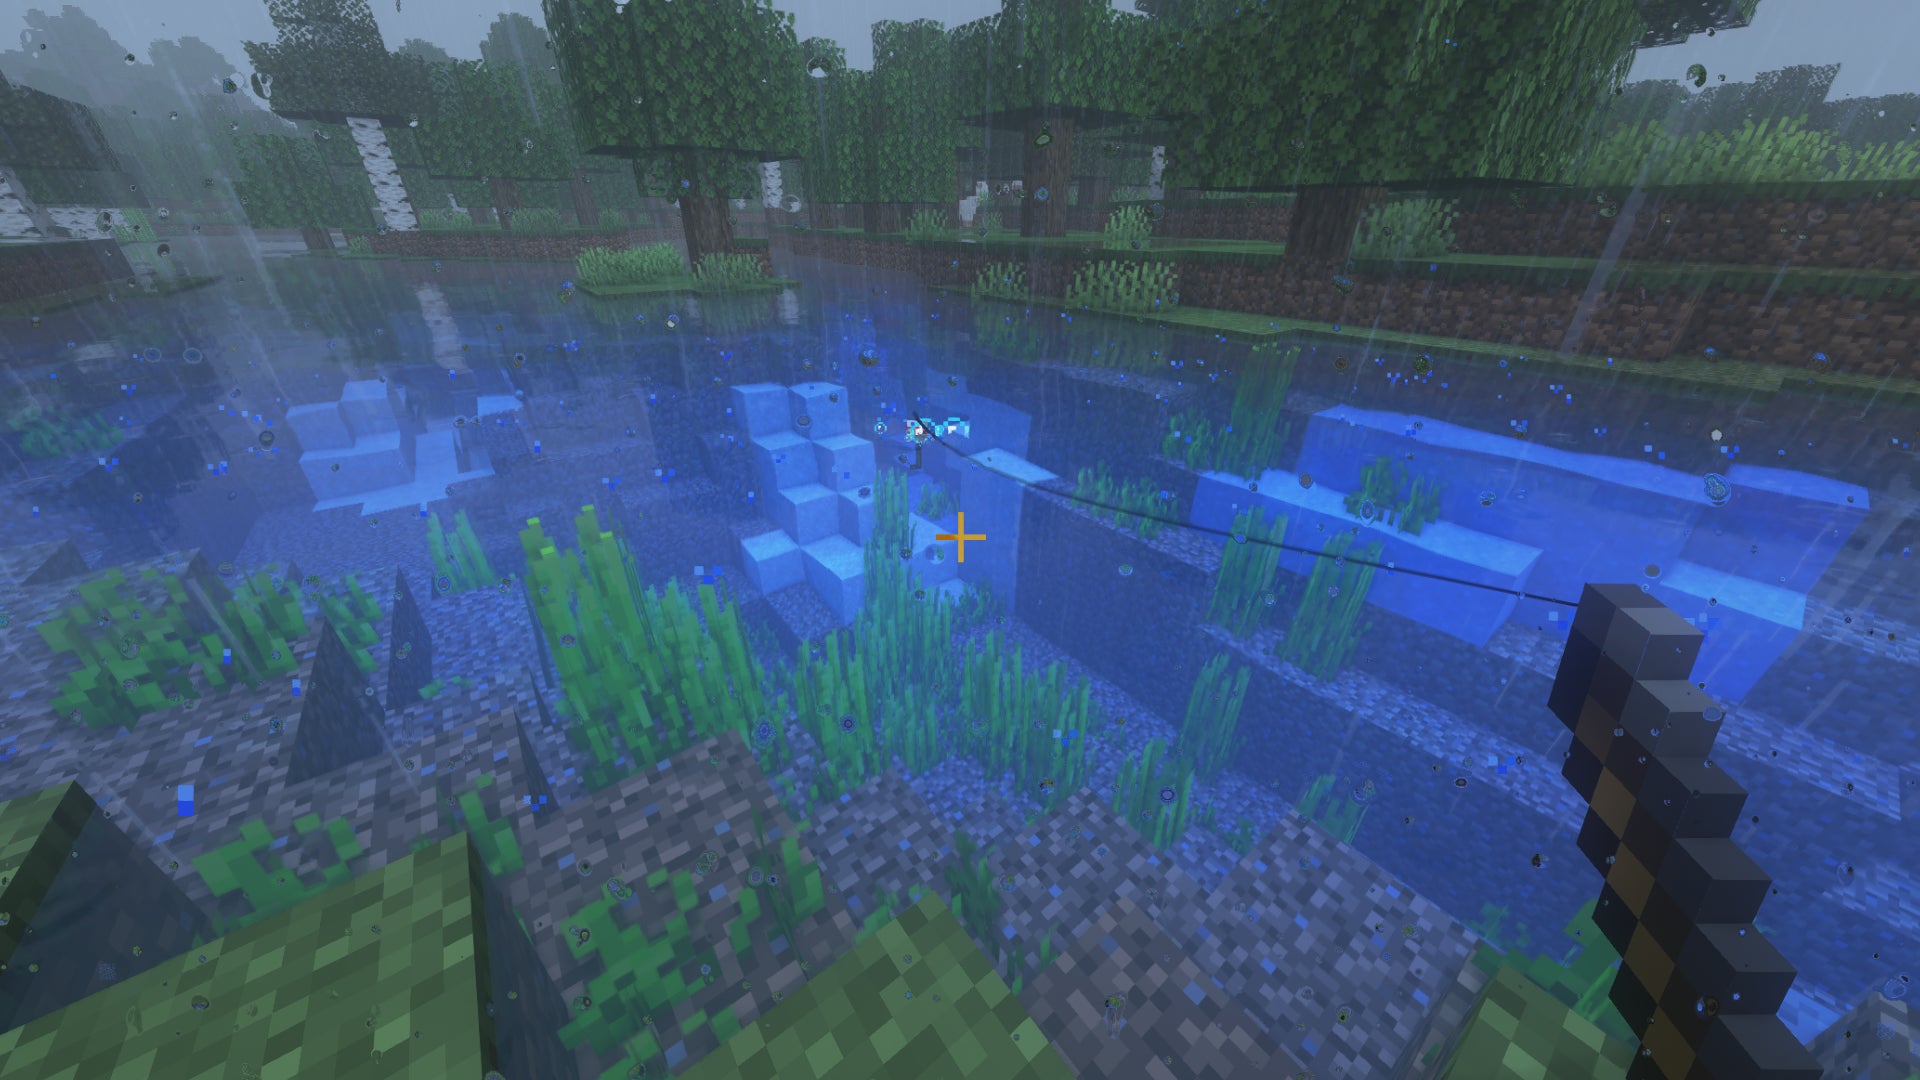 A Minecraft player is fishing in the rain.